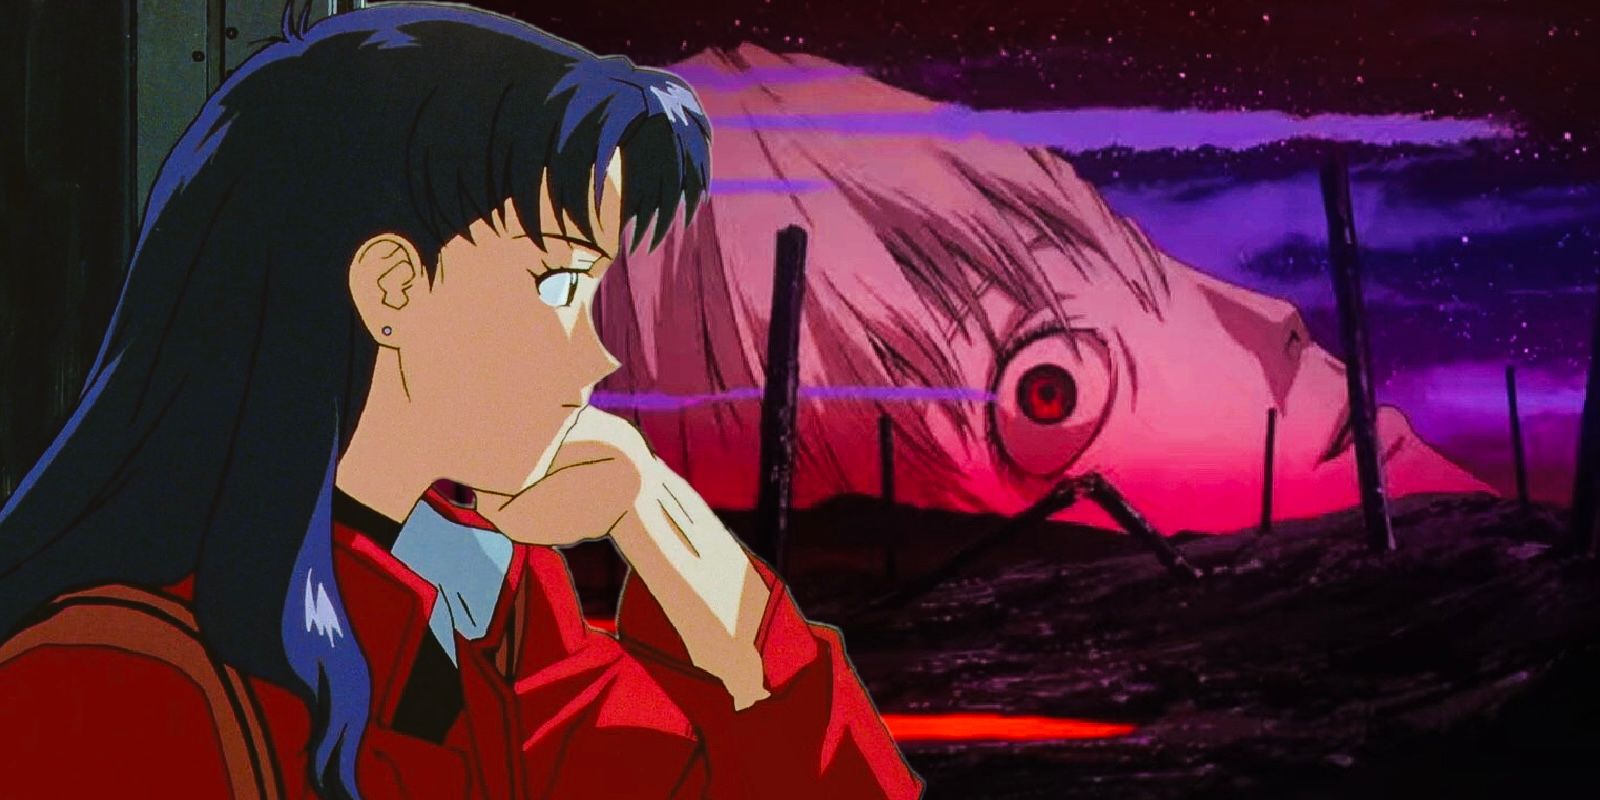 Misato looking out a window at Rei in the Third Impact in Neon Genesis Evangelion